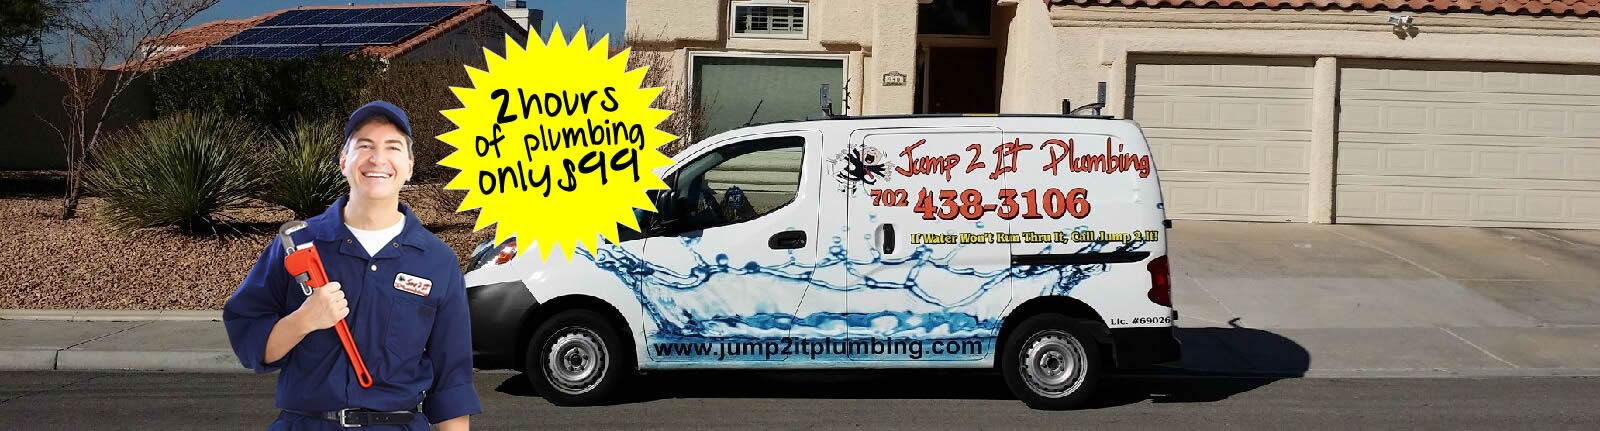 Professional Plumbing for only $99 | Plumbers in just 2 ...